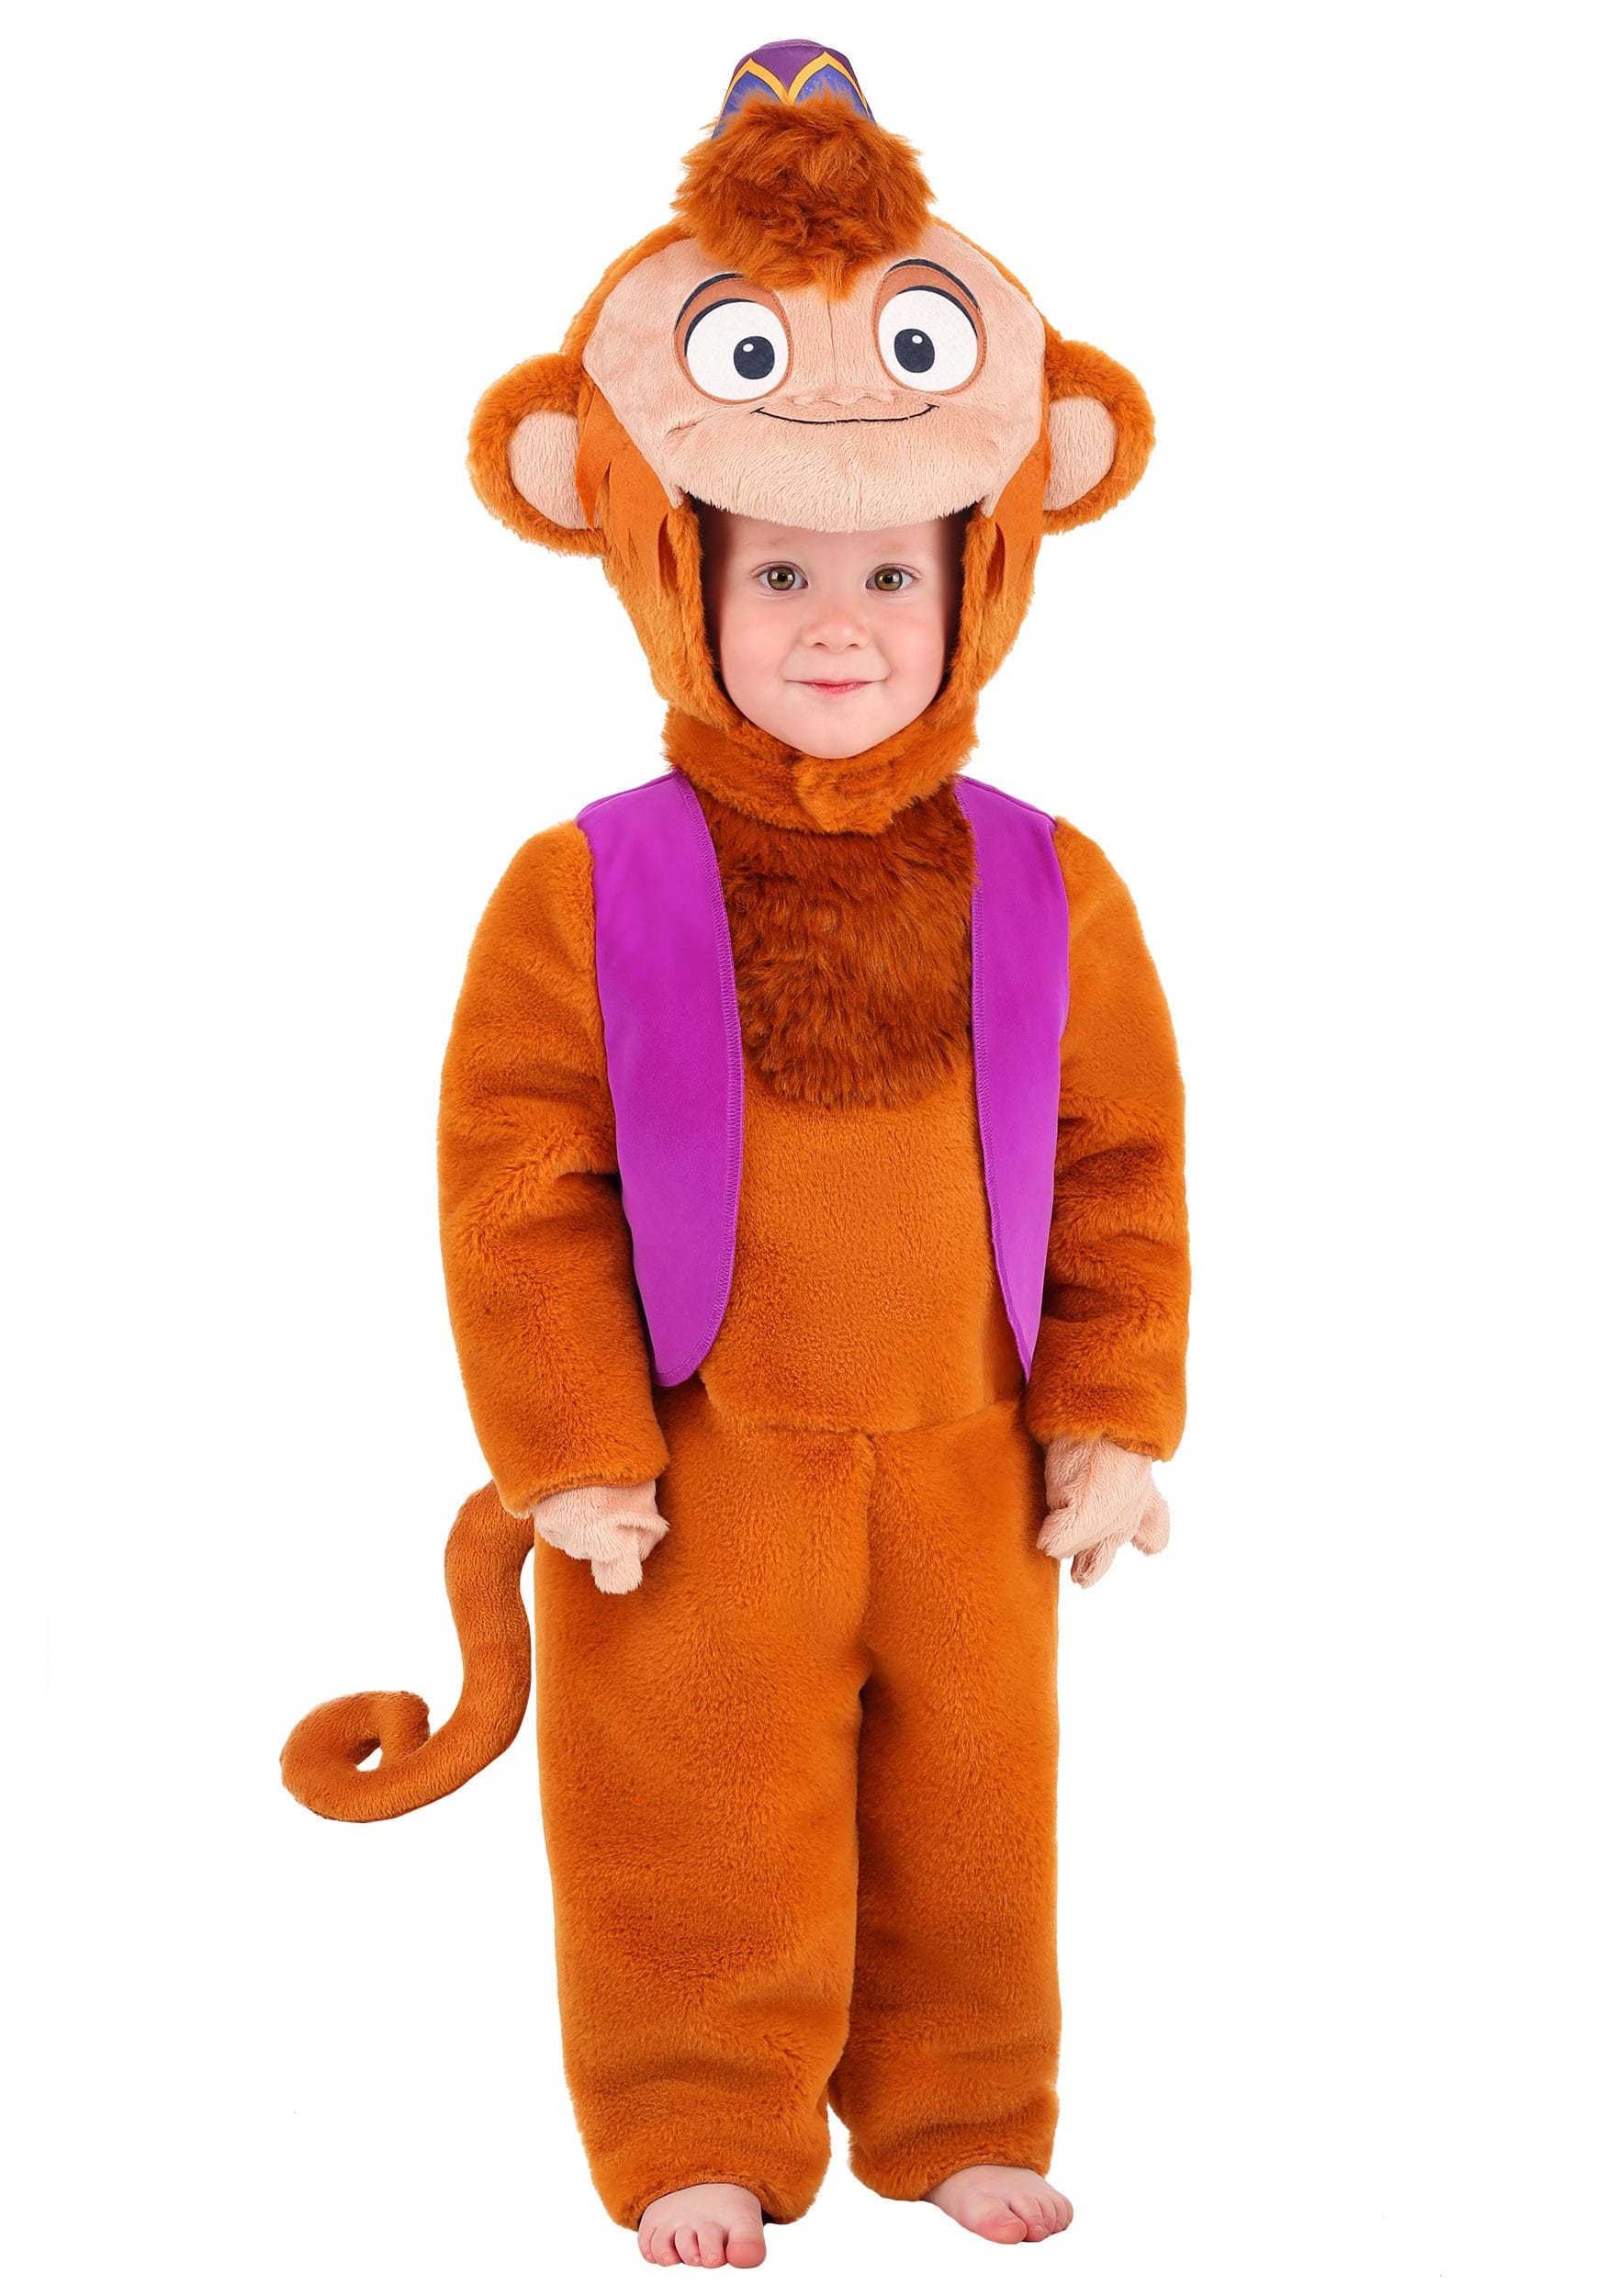 Disguise Limited Aladdin Abu Deluxe Costume for Toddlers from HalloweenCost...